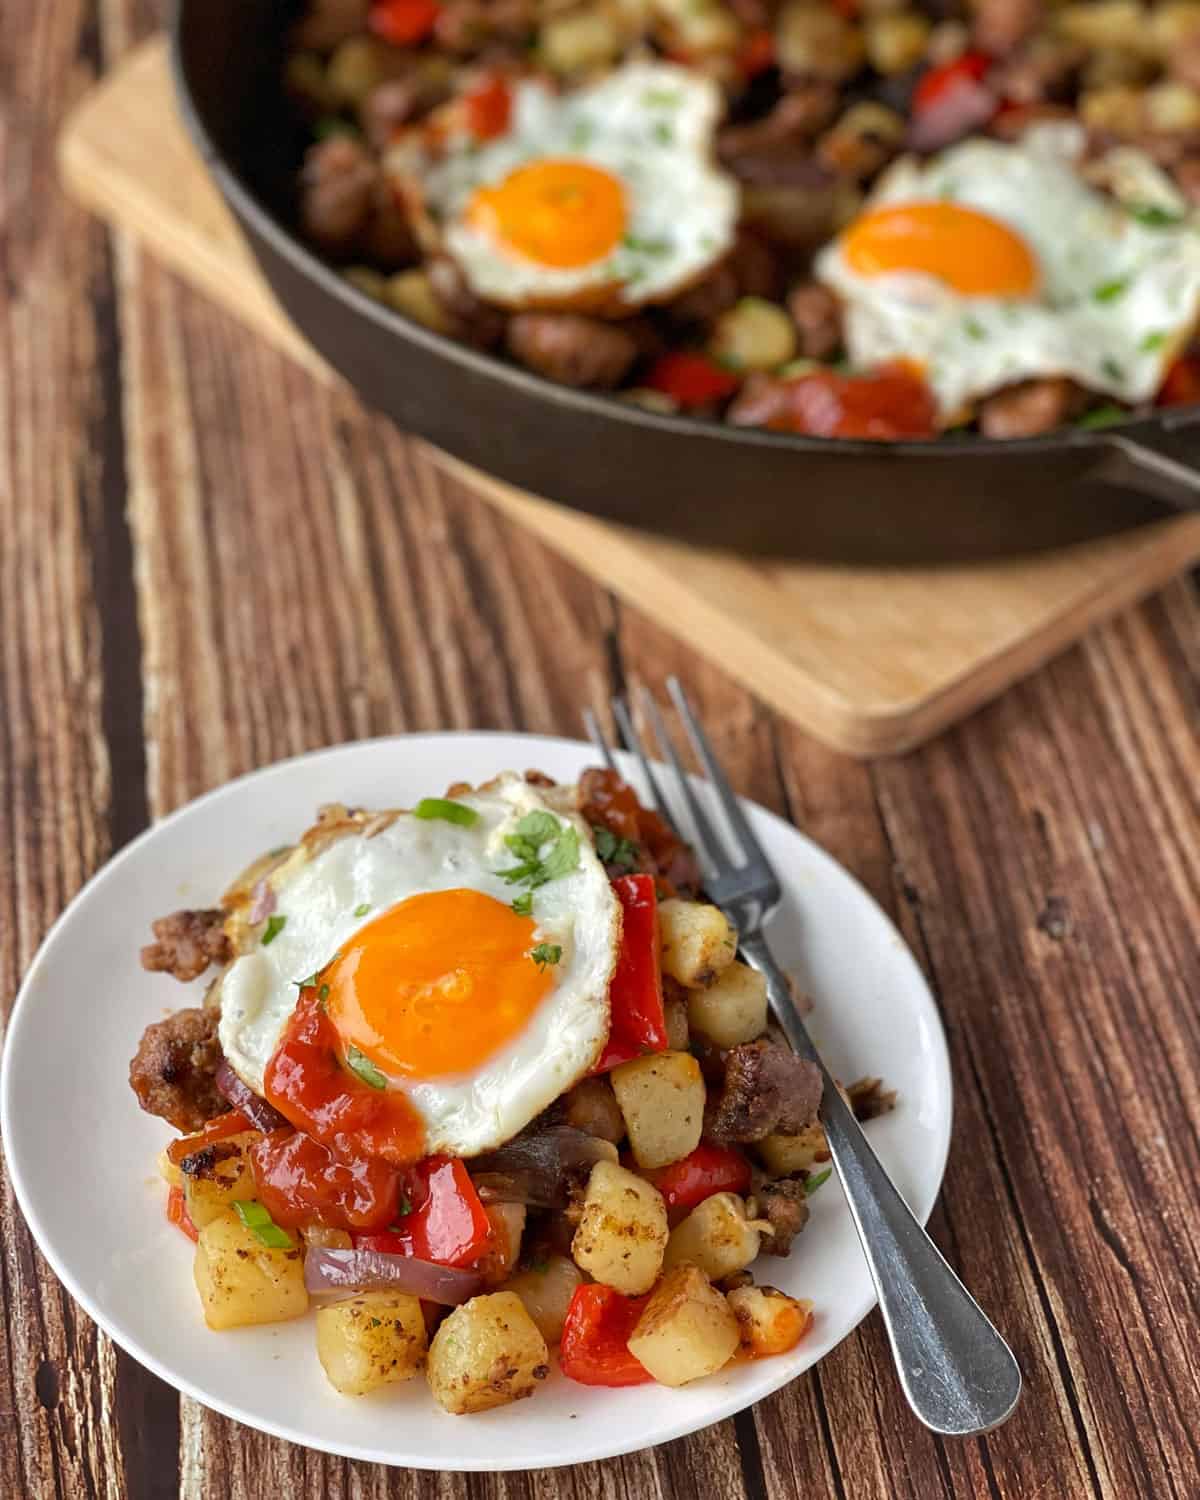 A serving of Skillet Sausage and Potatoes with a fried egg and tomato relish on a white plate with a fork resting on the side.